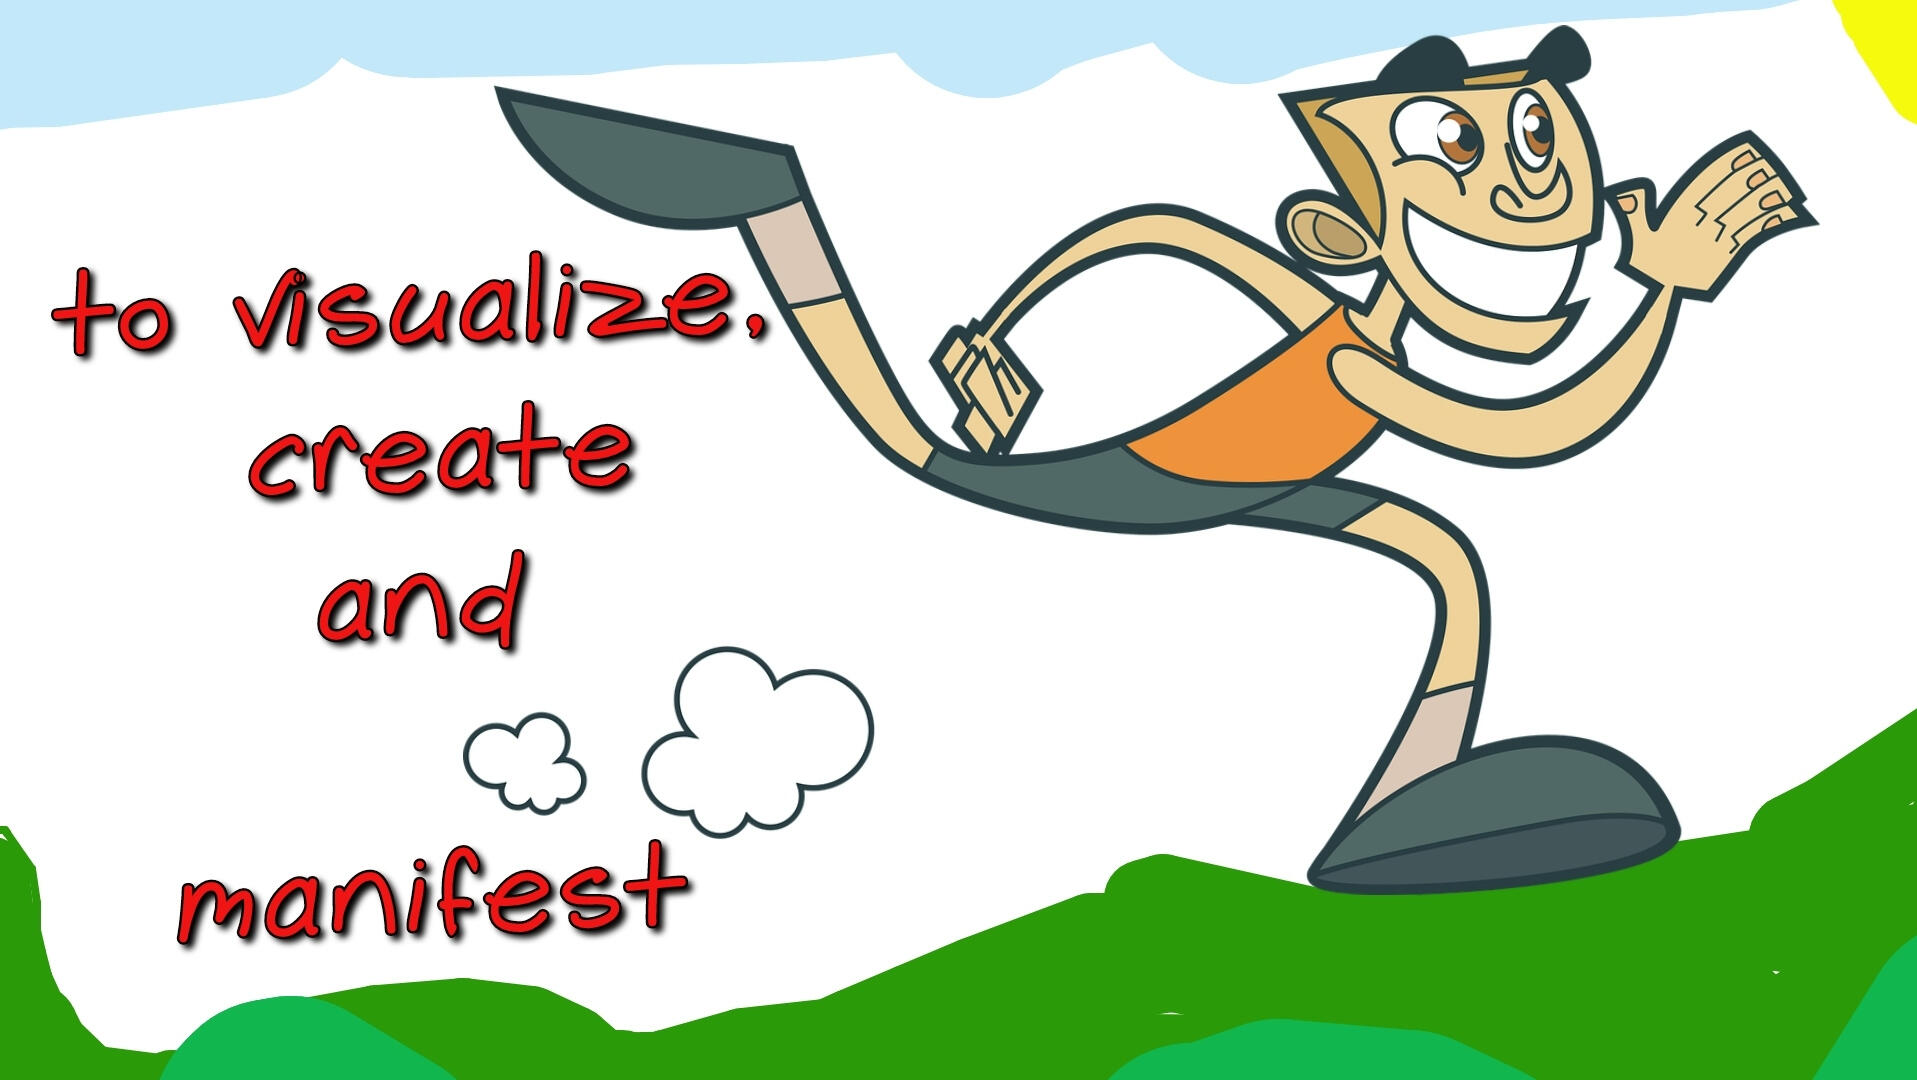 A cartoon looking man wearing an orange tank top, gray shorts and shoes, smiling wide, showing his teeth and eyes focused and excited runs up a green hill on a clear, sunny day. The words, "visualize, create and manifest" printed. Image on Inspire2.org.